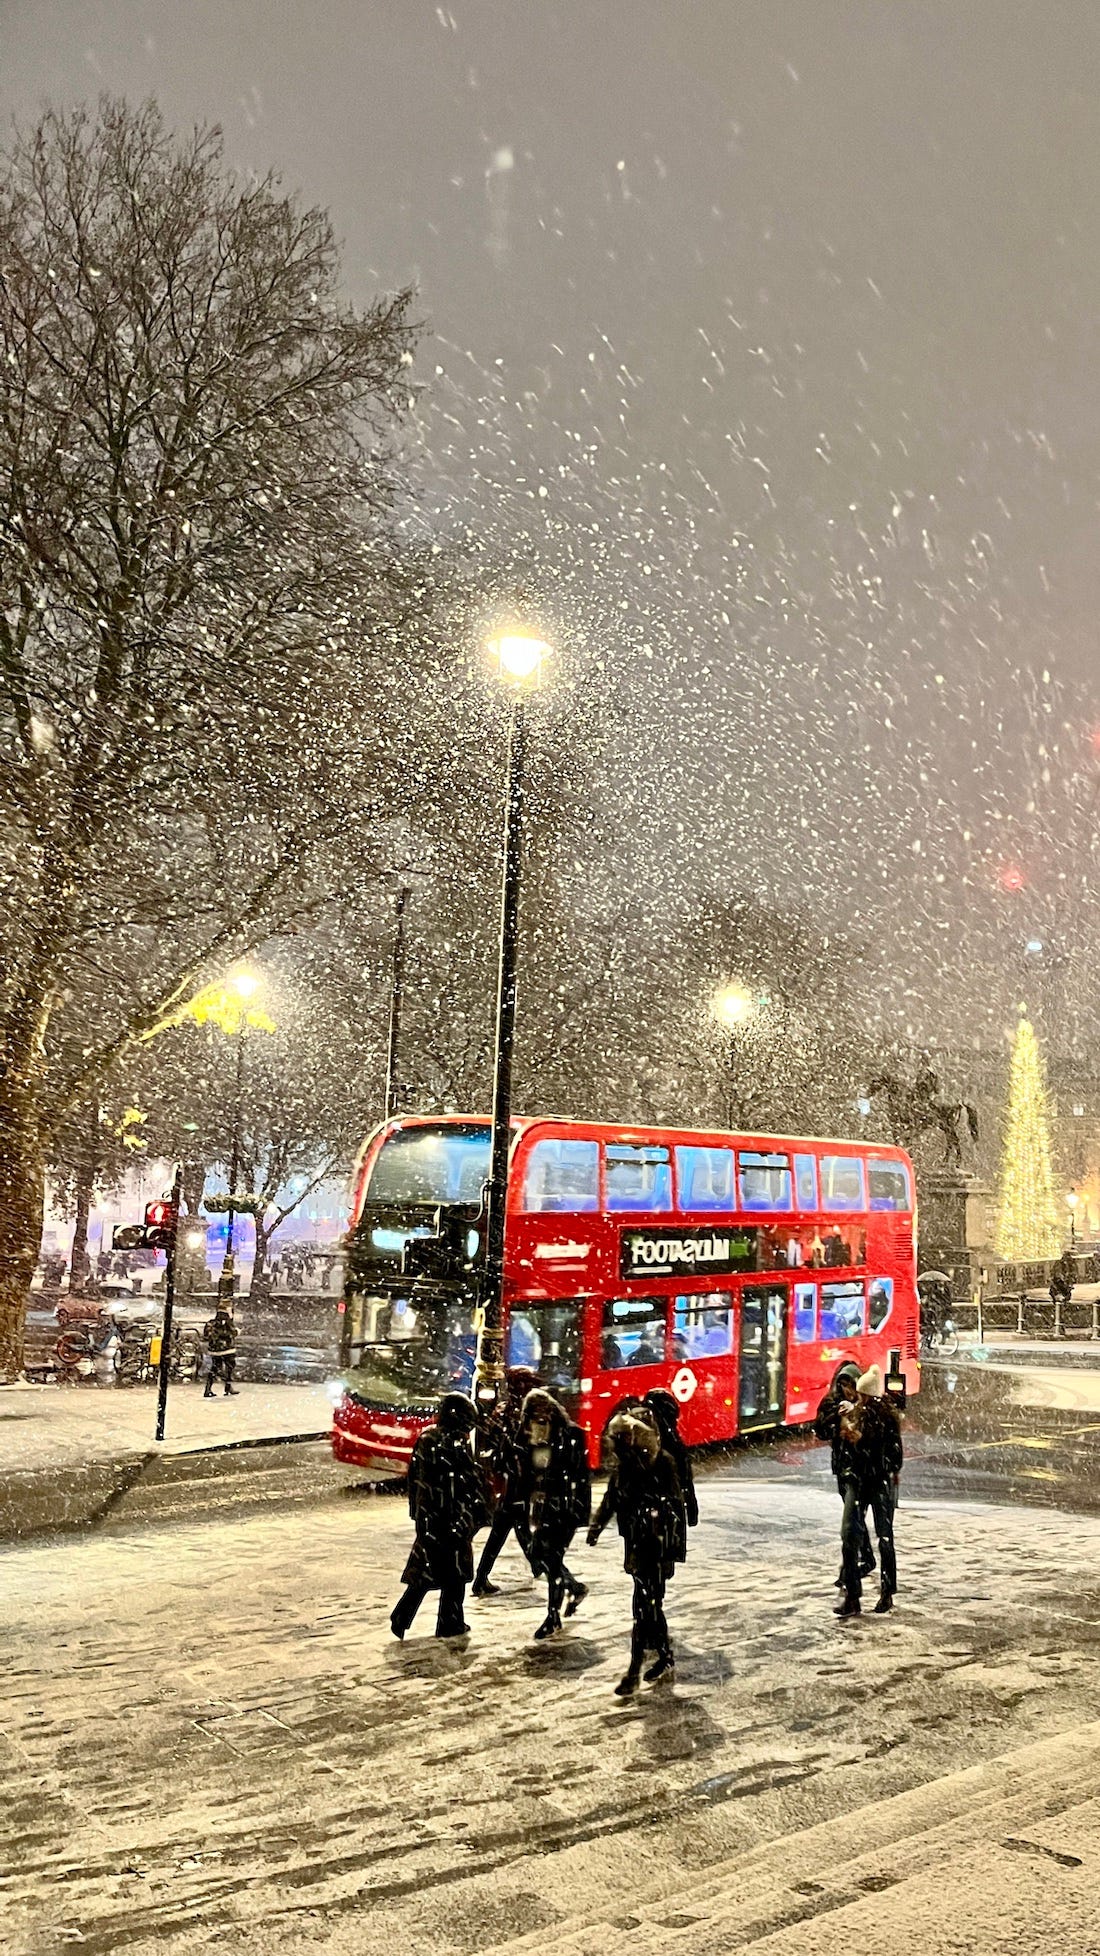 Image: a photo of the iconic red bus on the streets of London in Trafalgar Square, the street and building lights, and the Christmas tree, twinkling in the background, with snow falling in the foreground. 